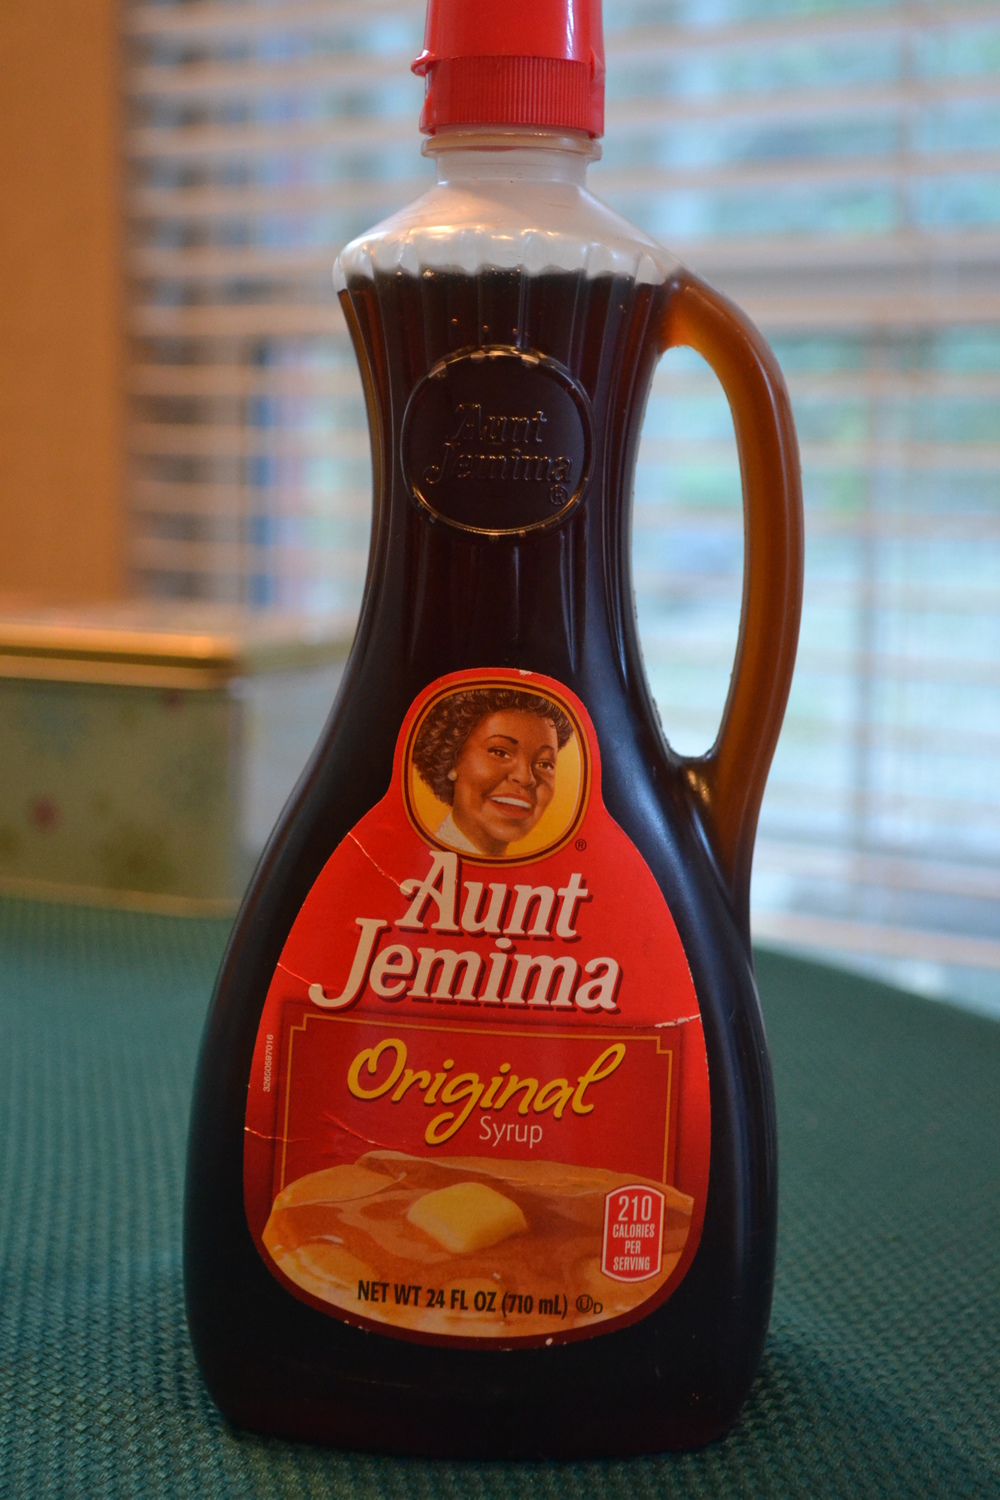 Aunt Jemima is is a popular brand of maple syrup. Photo by Rustin Mehrabani-Farsi 